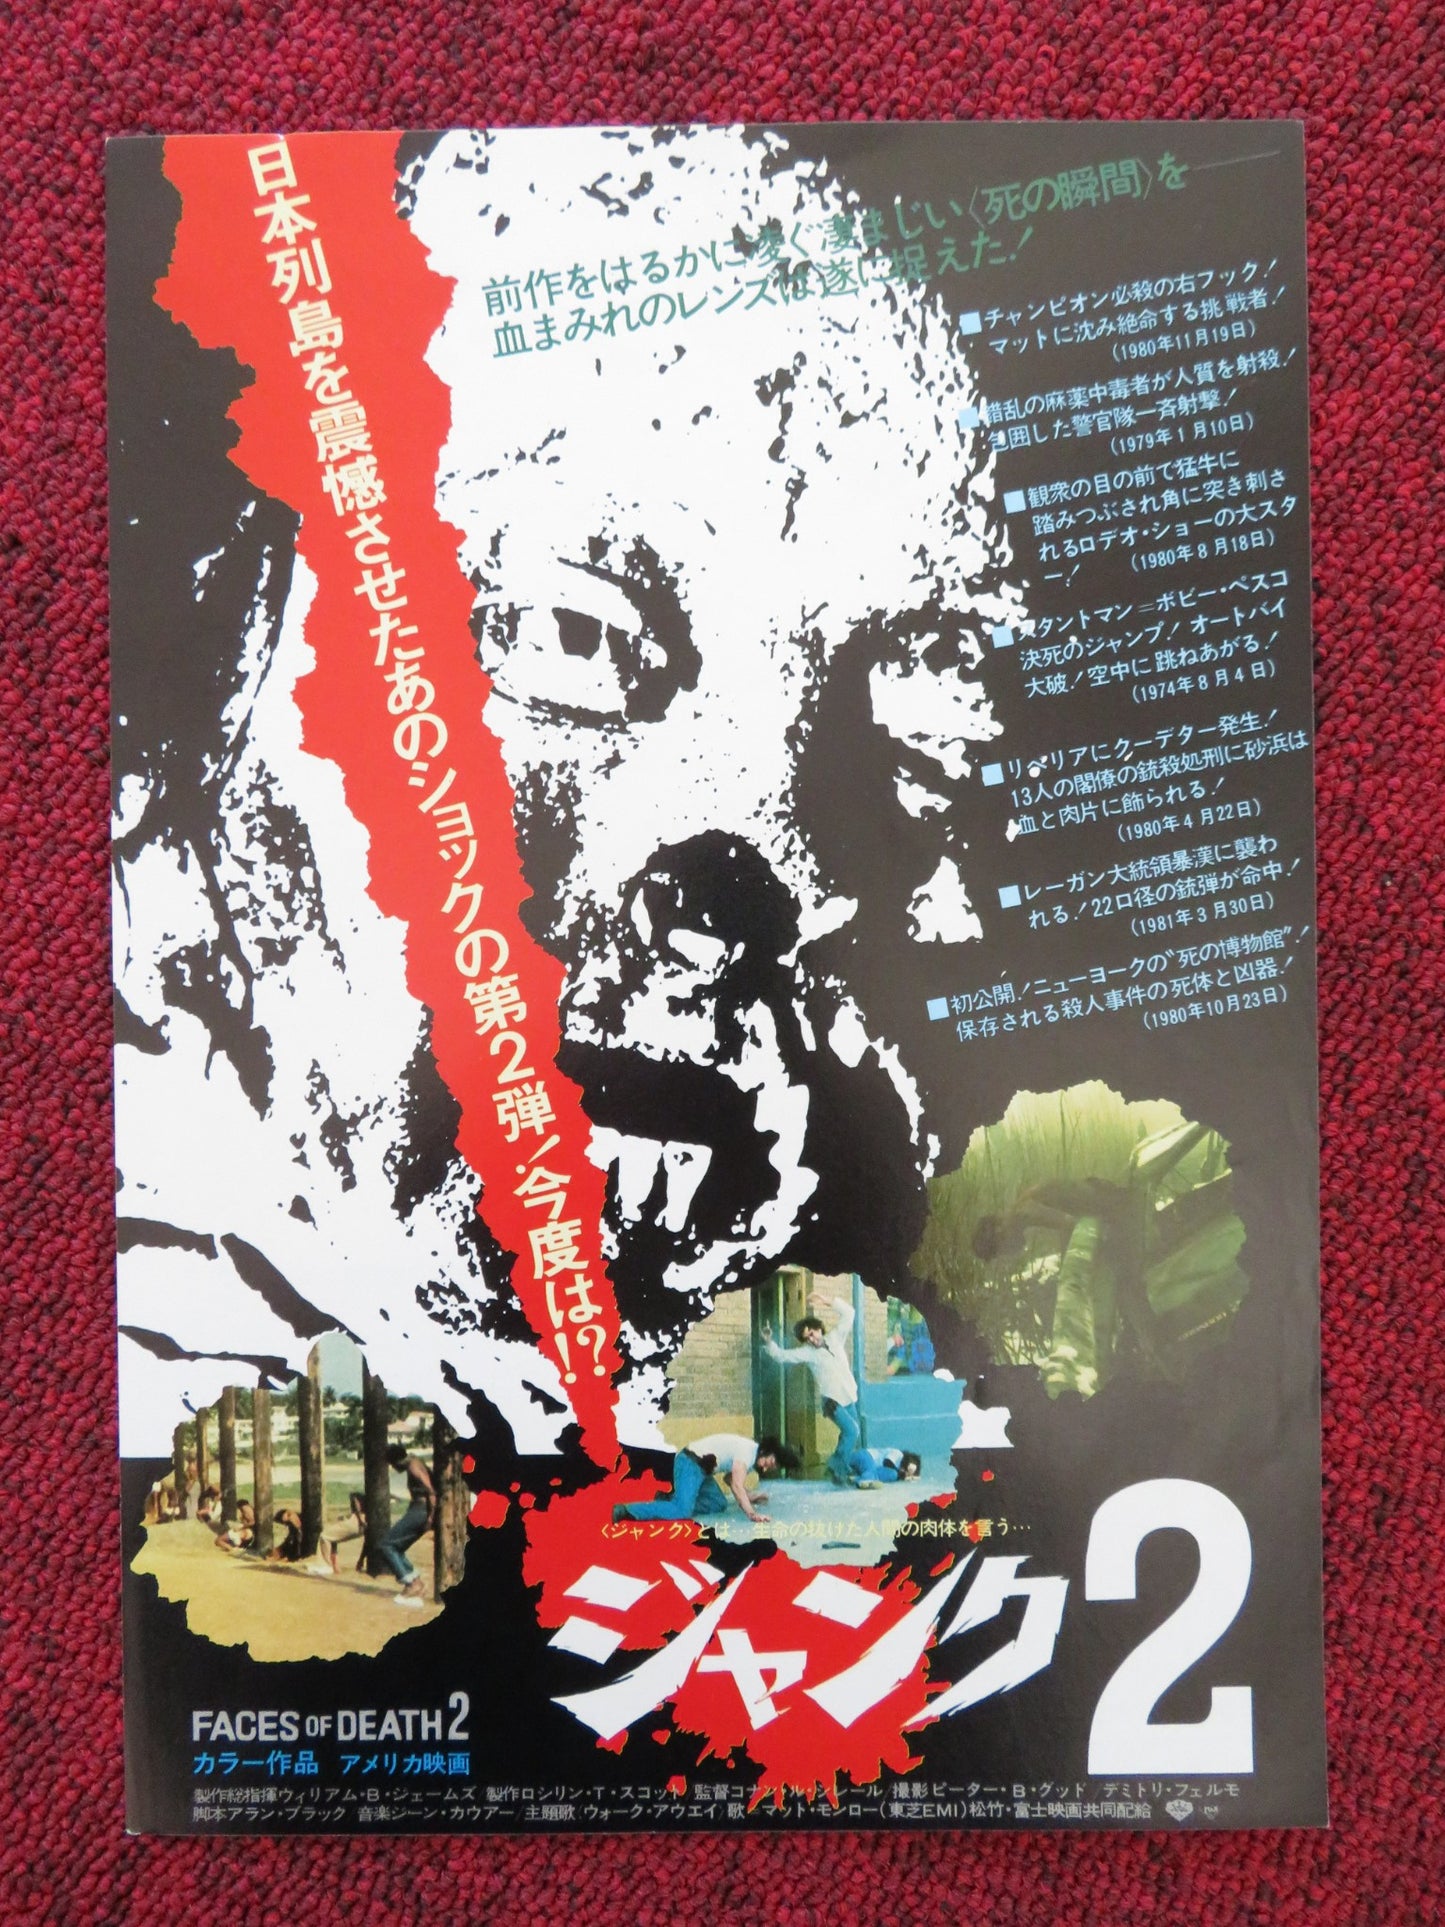 FACES OF DEATH 2 JAPANESE CHIRASHI (B5) POSTER MICHAEL CARR JAMES BRADY 1981